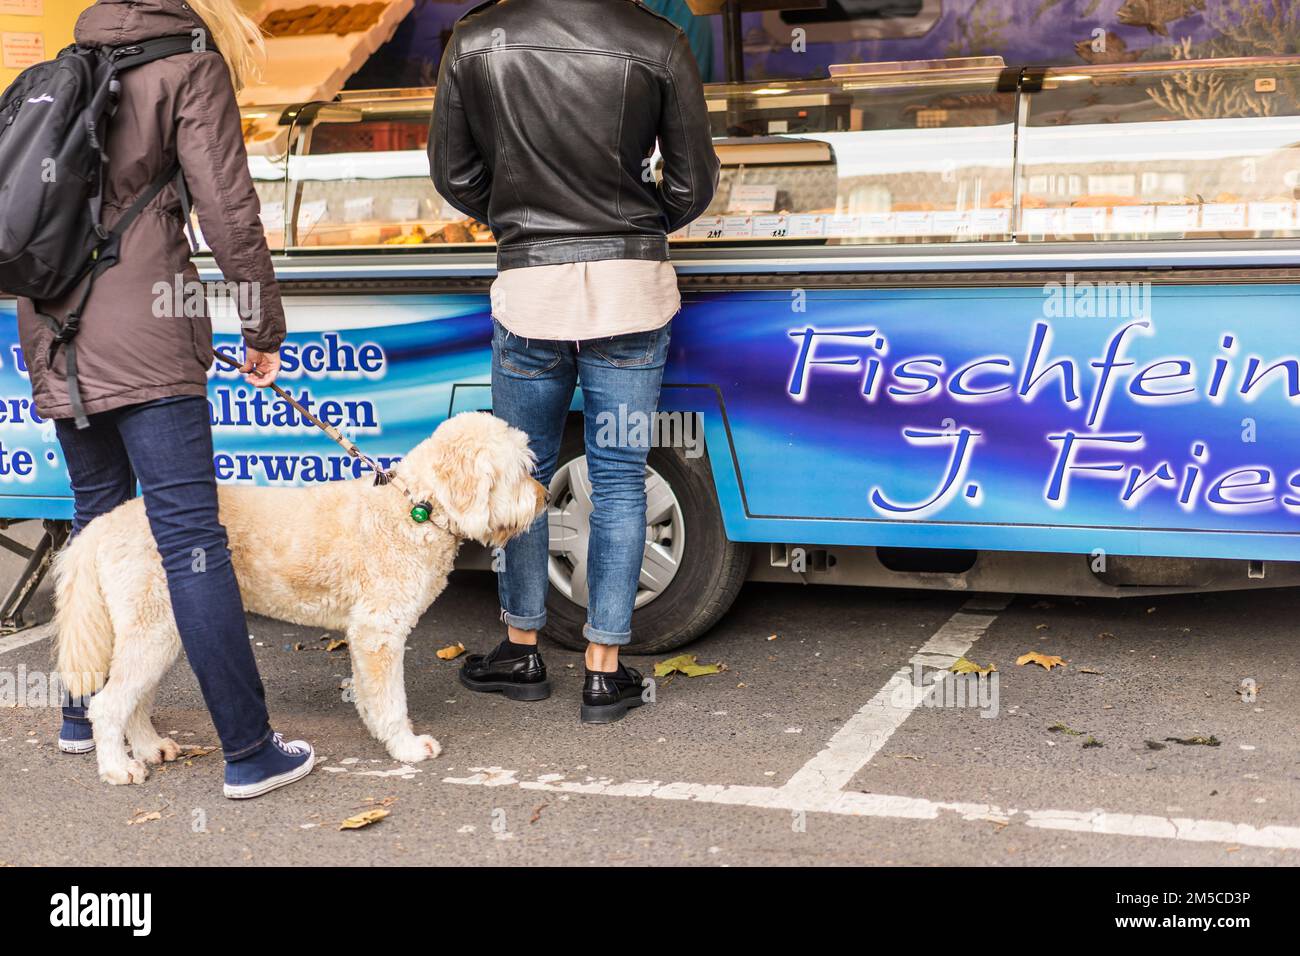 Two people waiting in line for fish and chips with white dog on a leash and black outfits Stock Photo